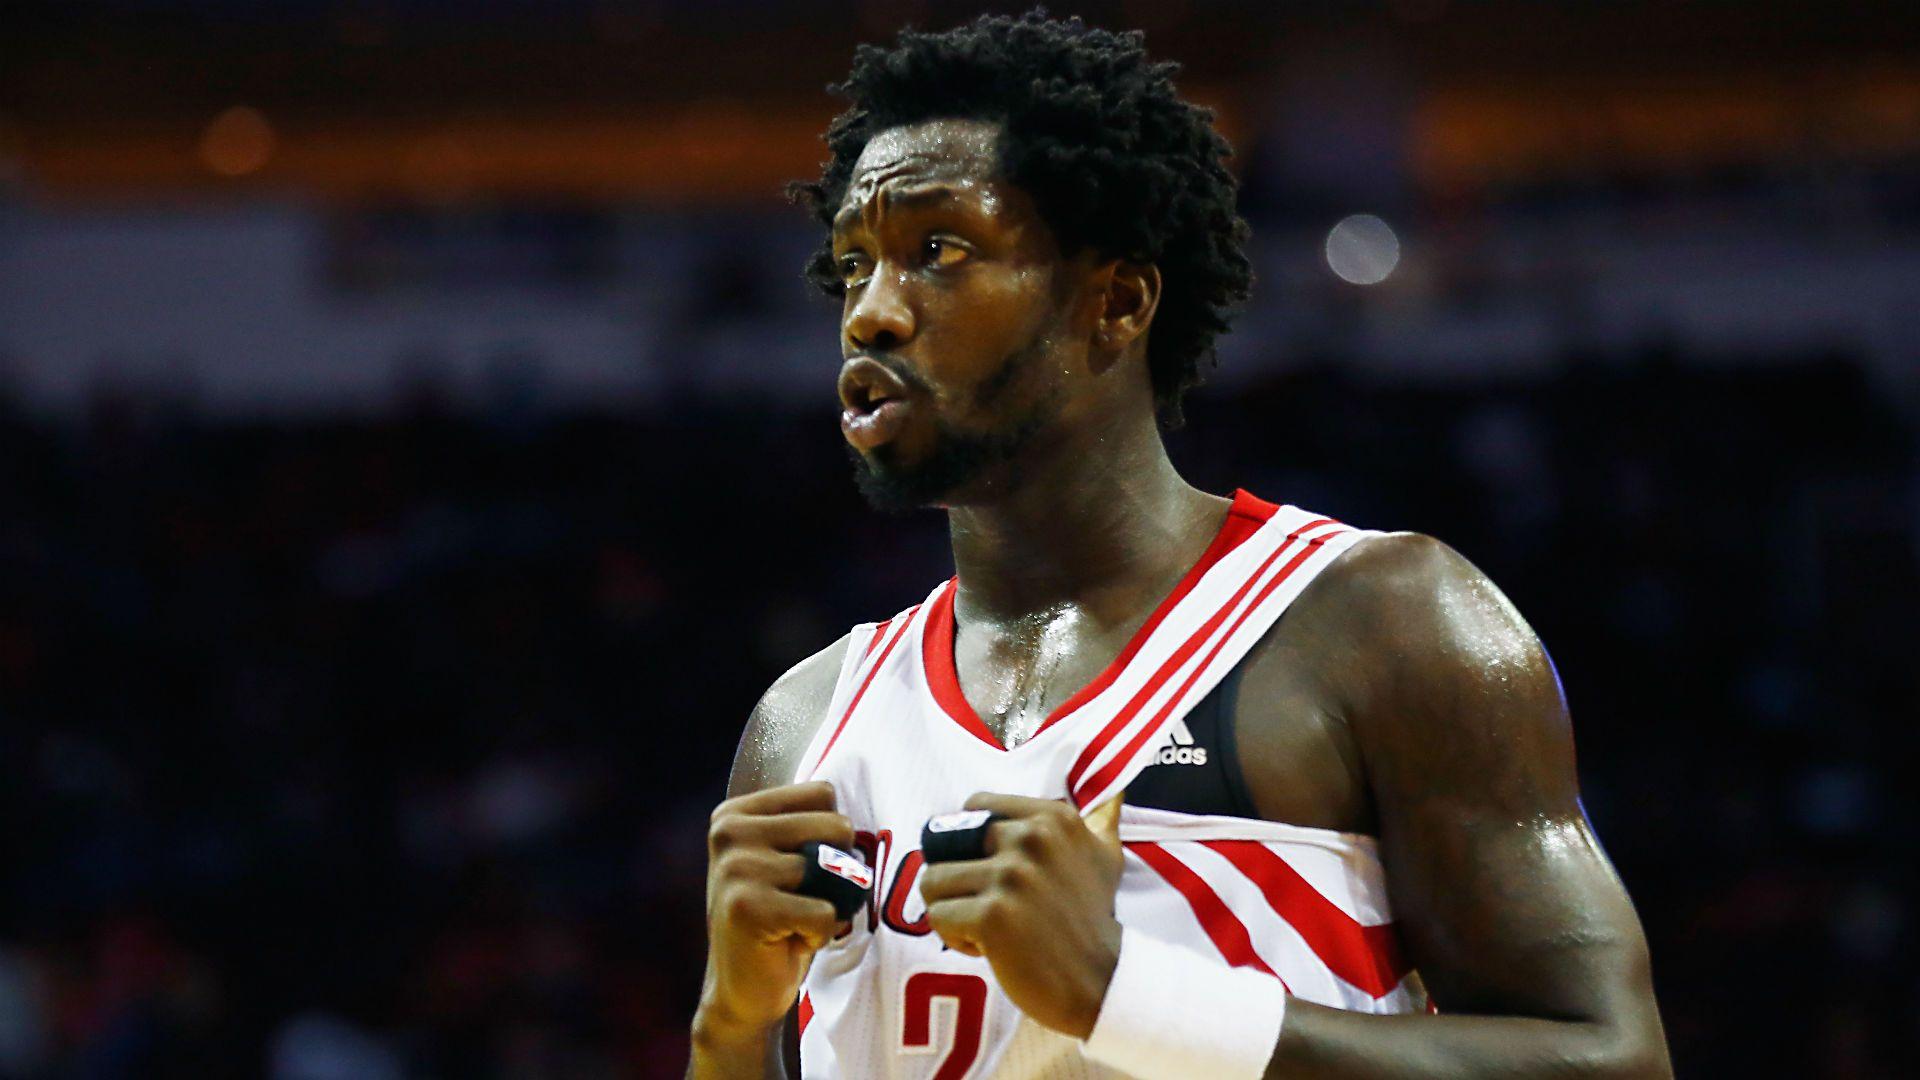 NBA playoffs 2017: Rockets' Patrick Beverley plays in Game 4 after